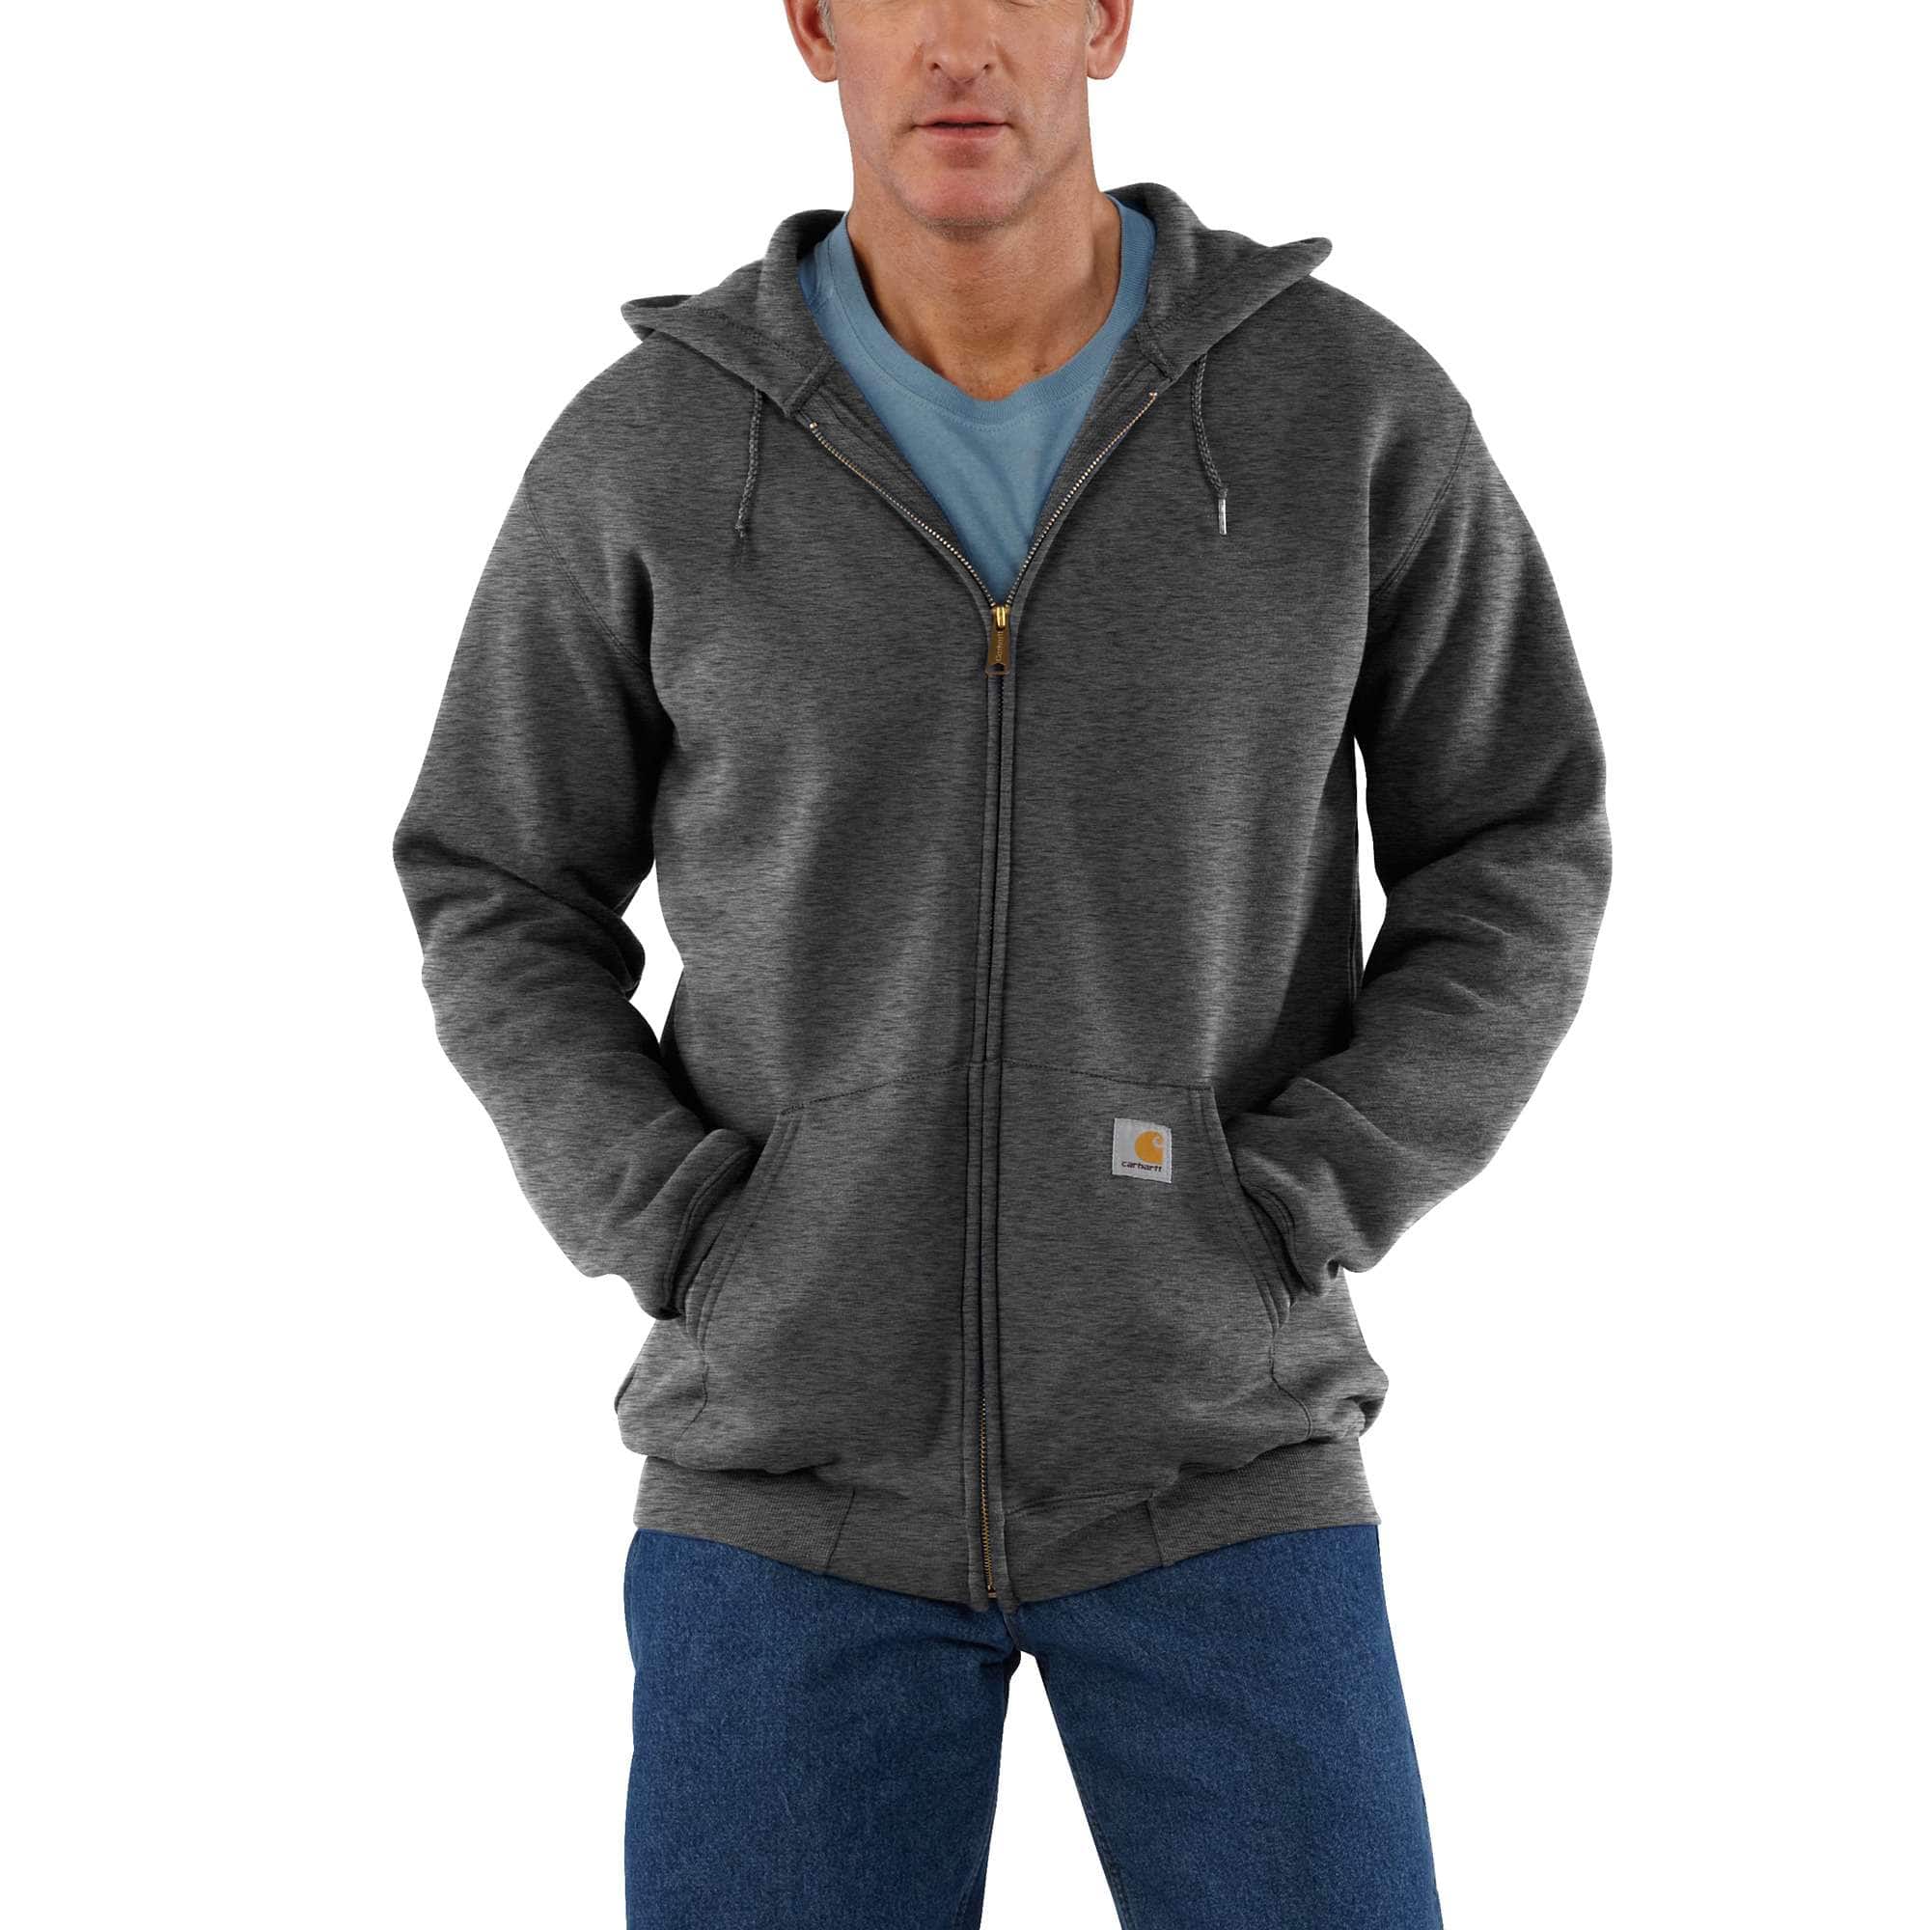 AP.Room Stitch and Toothless Mens Midweight Hooded Zip Front Sweatshirt 